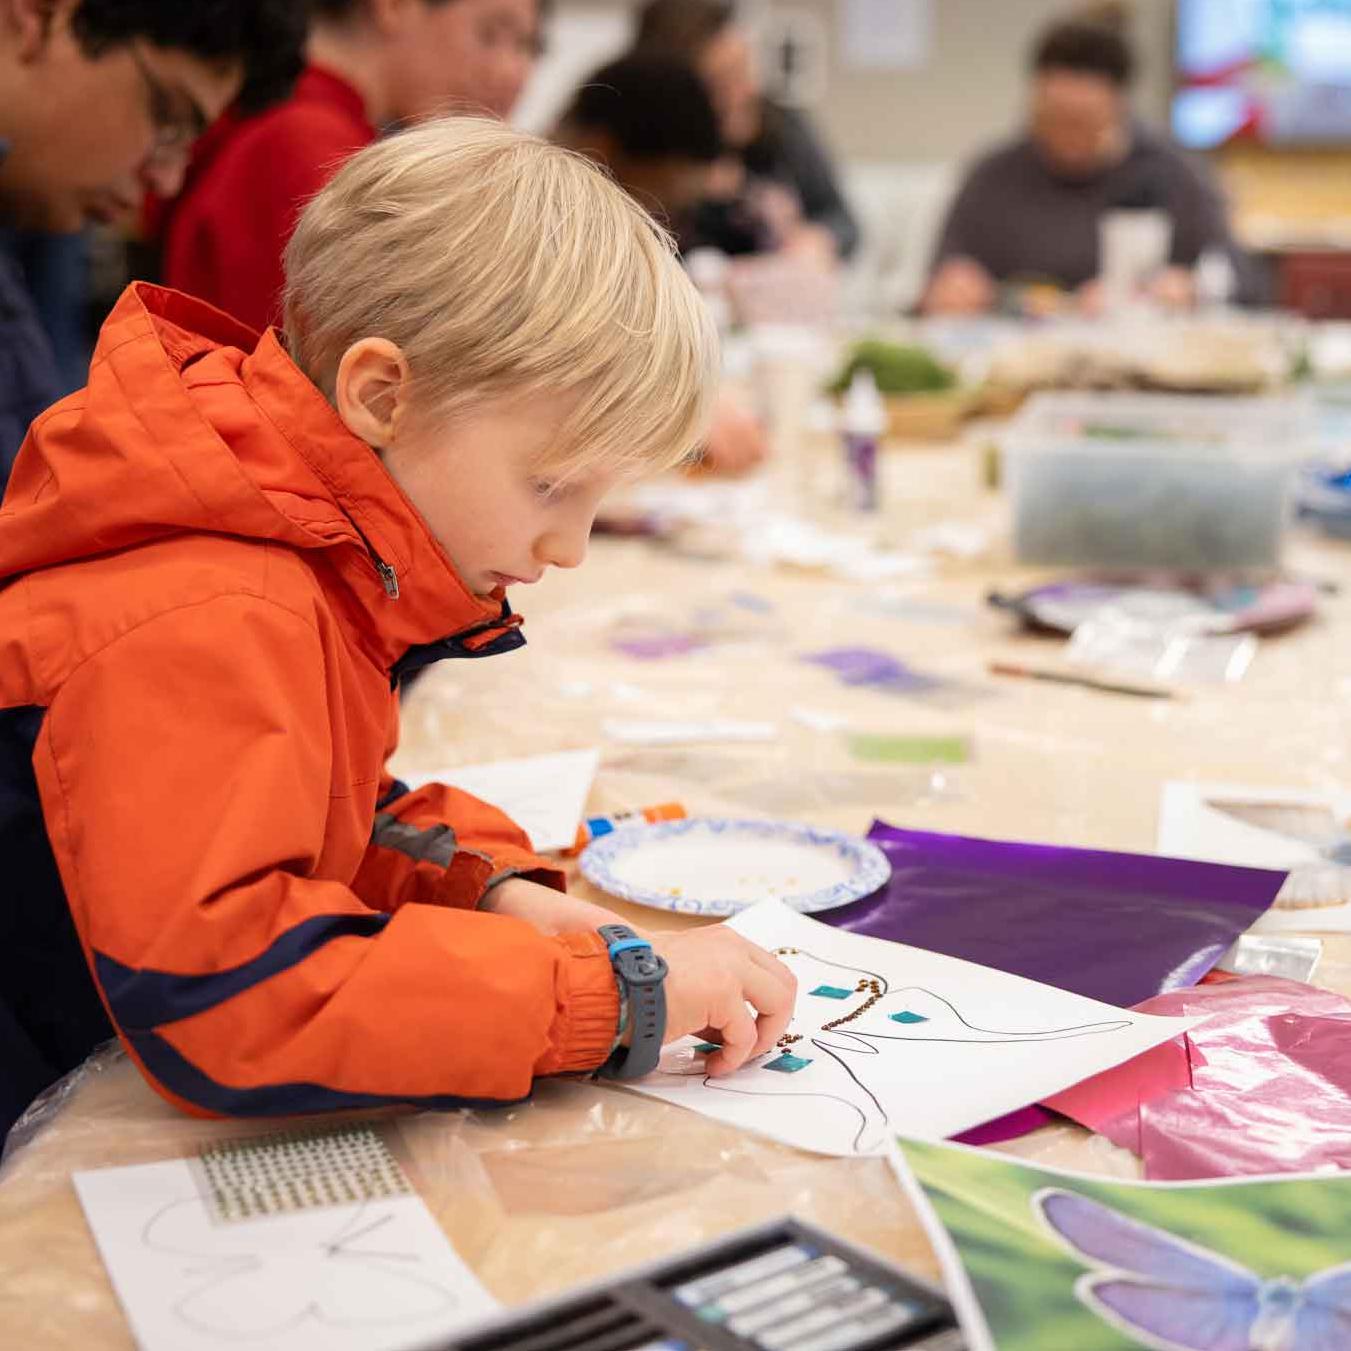 		kid working with art materials to make a butterfly
	